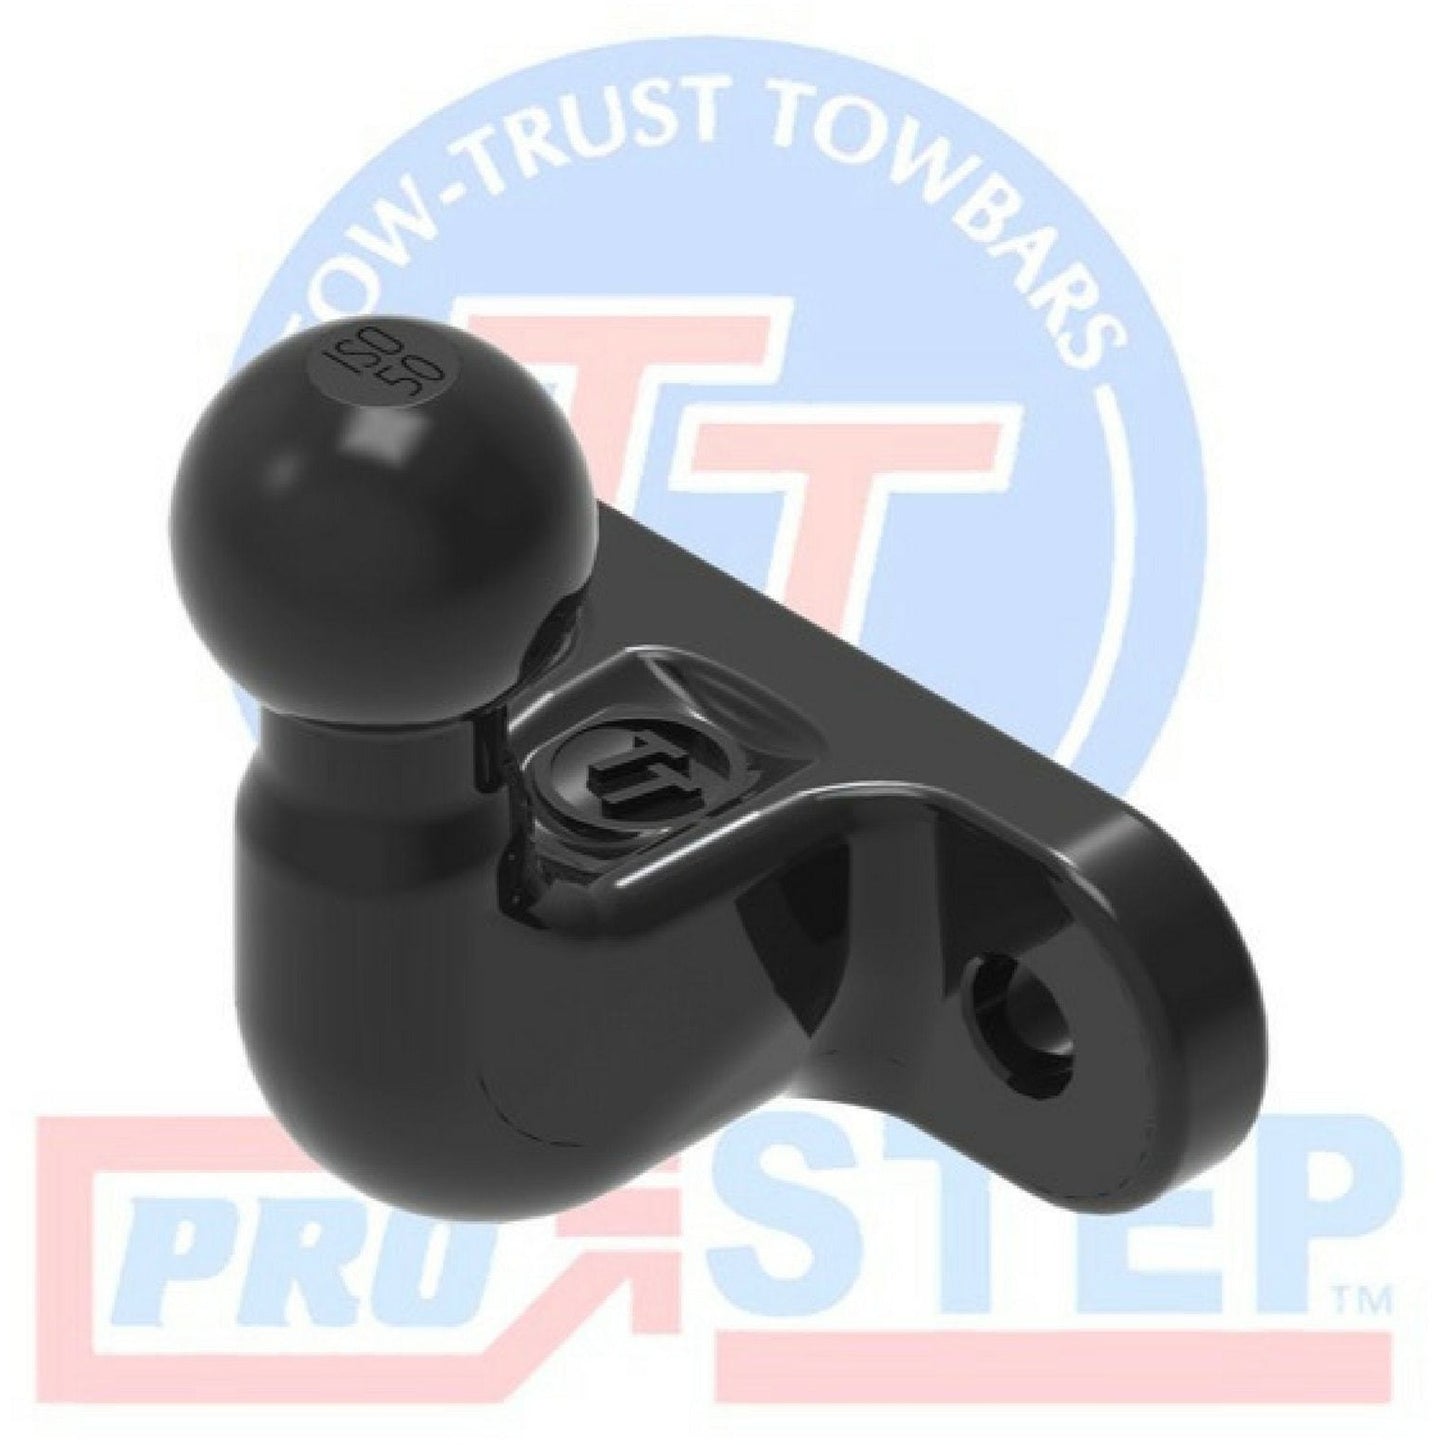 Tow Trust ALKO Chassis Towbar - Quality Caravan Awnings